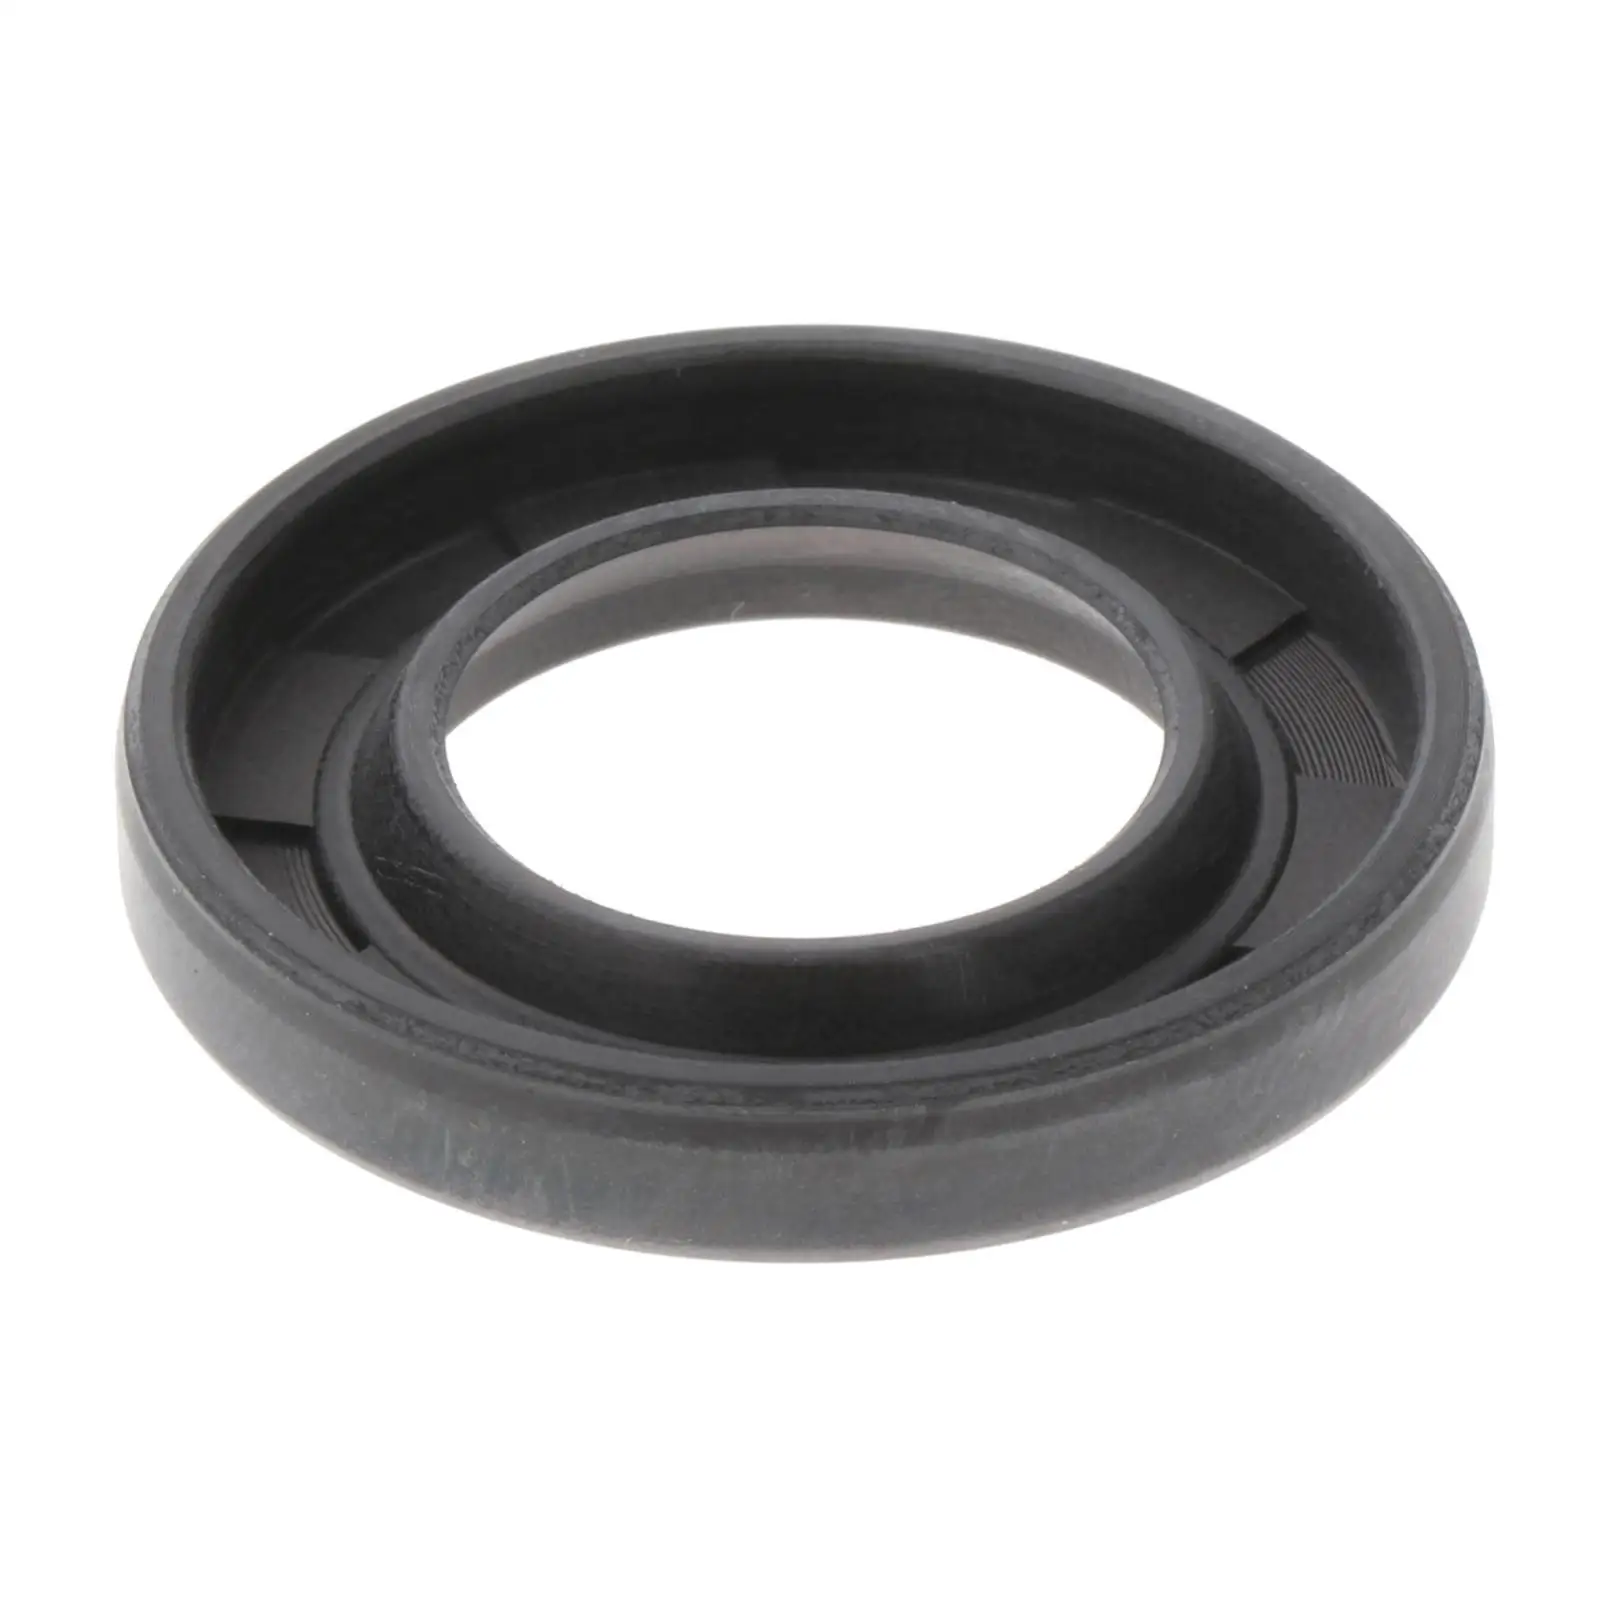 Oil Seal Spare Parts 93106-18M01 for Yamaha Outboard 60HP 70HP 2 Stroke 3cyl Lower Crankshaft Outboard Engine